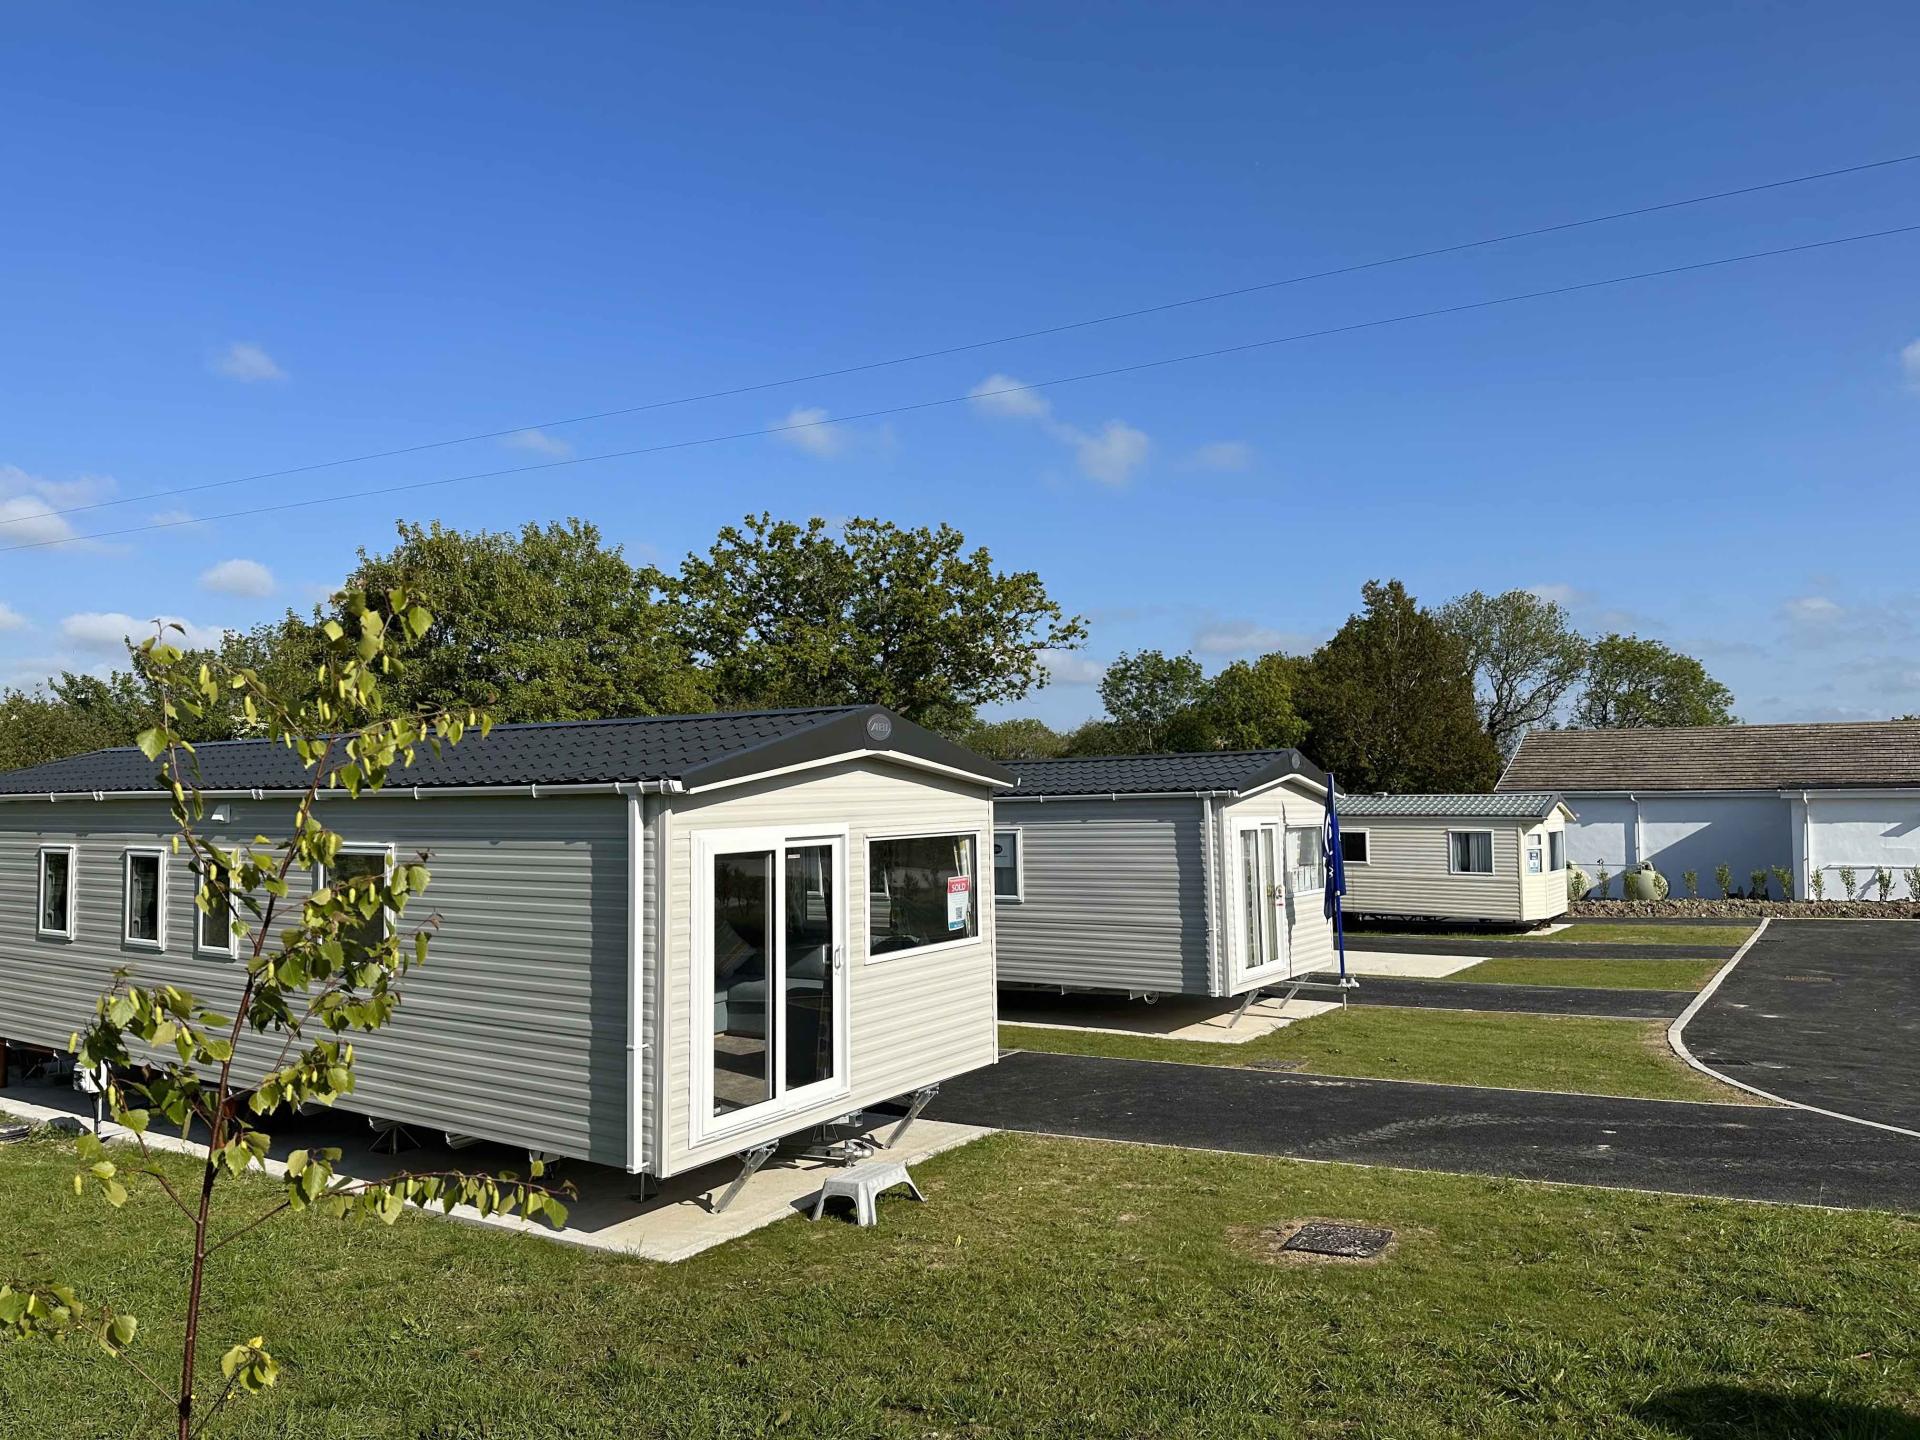 Pilbach holiday park - Near Aberporth, Mid Wales | Barkers Leisure